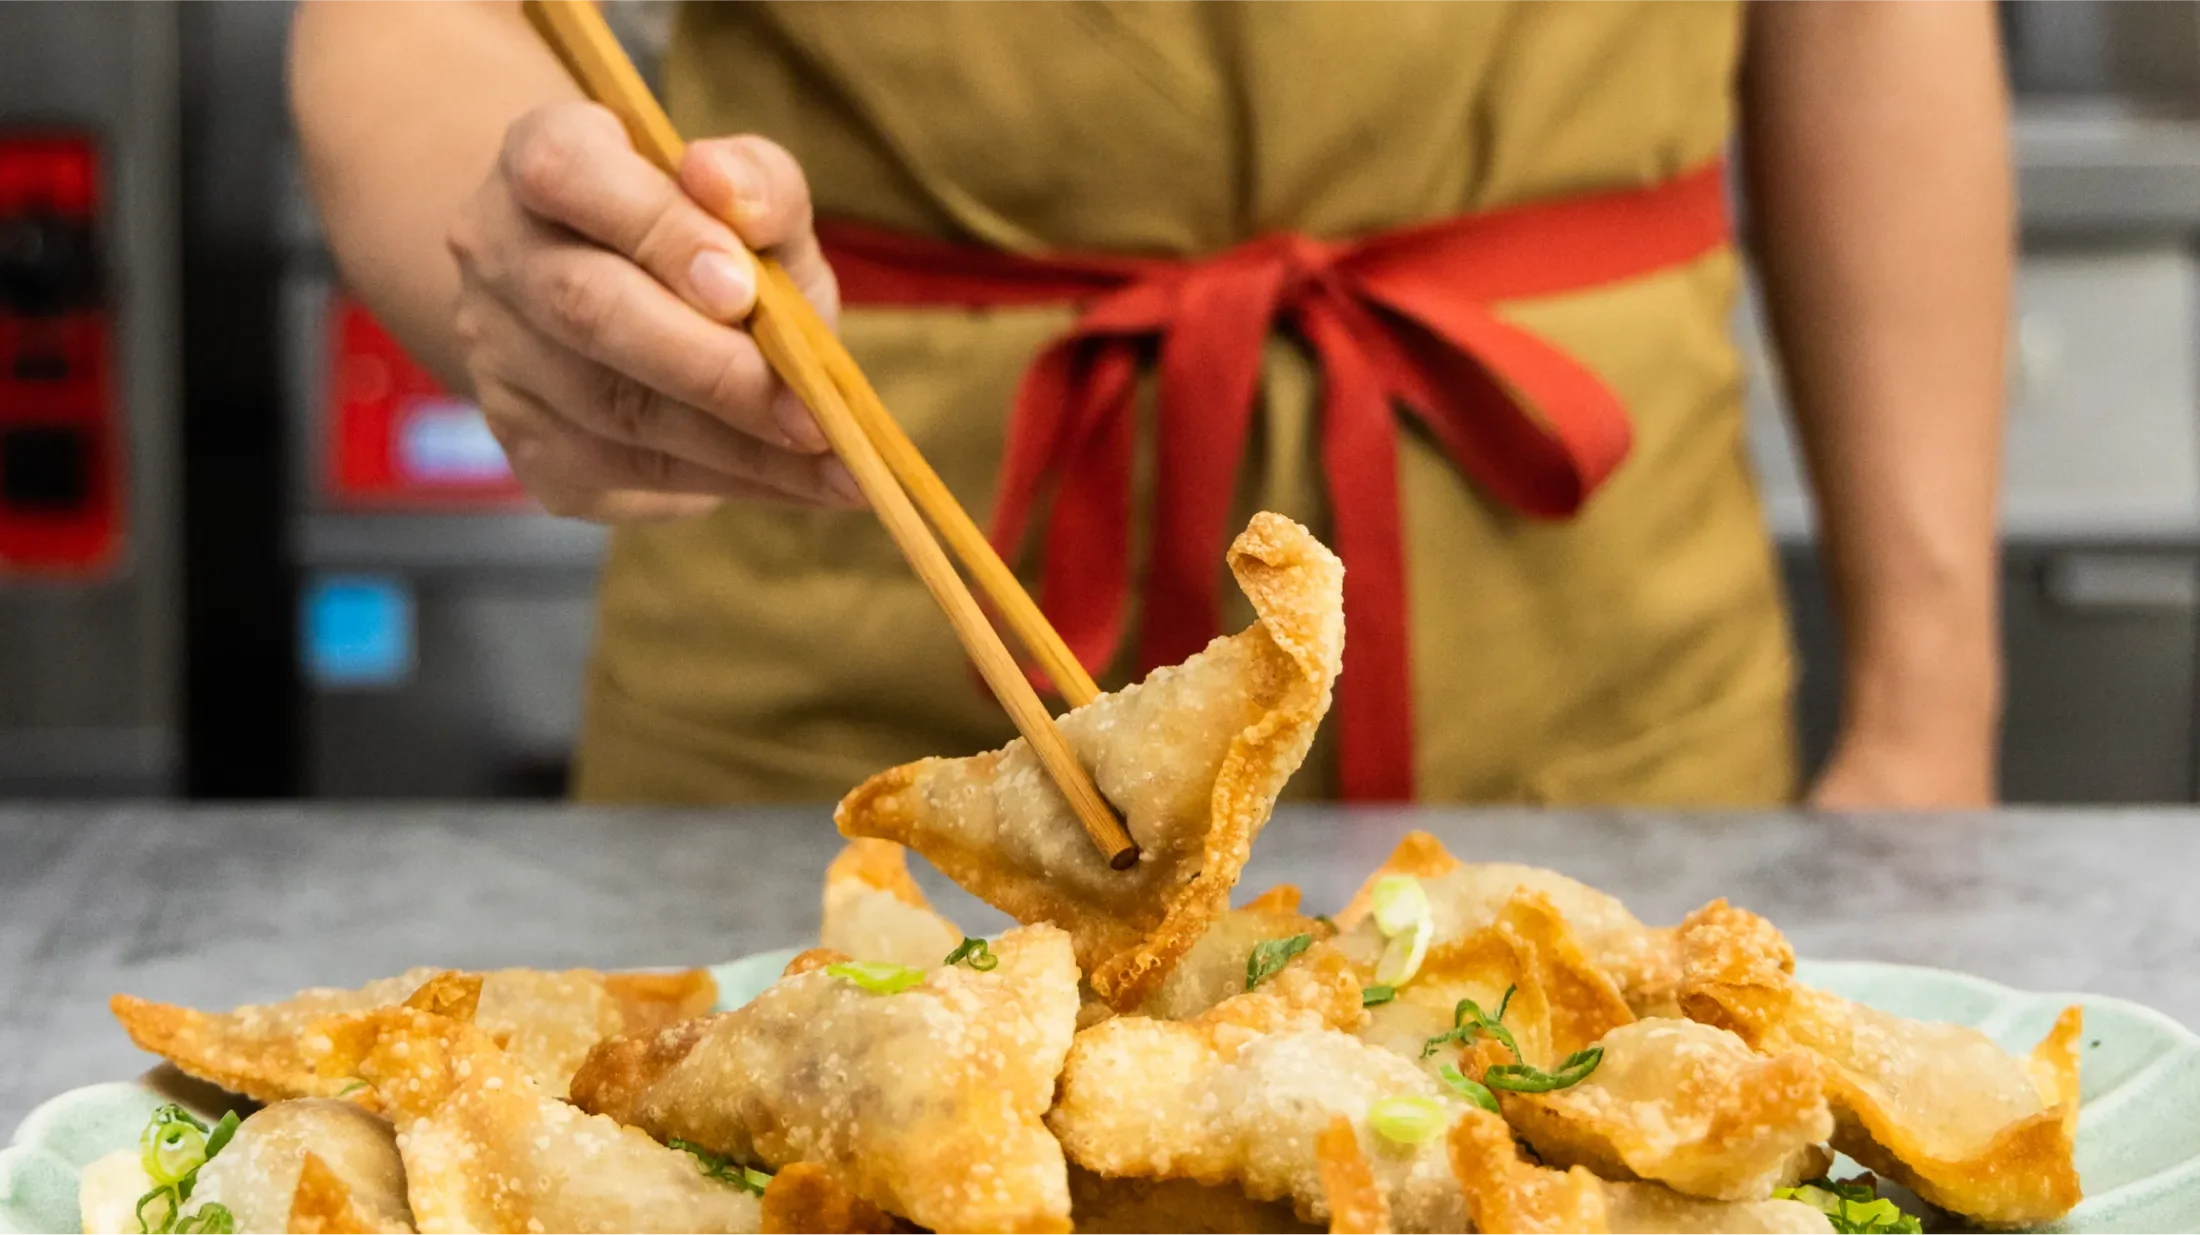 Man with a red sash tied around his waist holding a fried wonton with chopsticks over a full plate